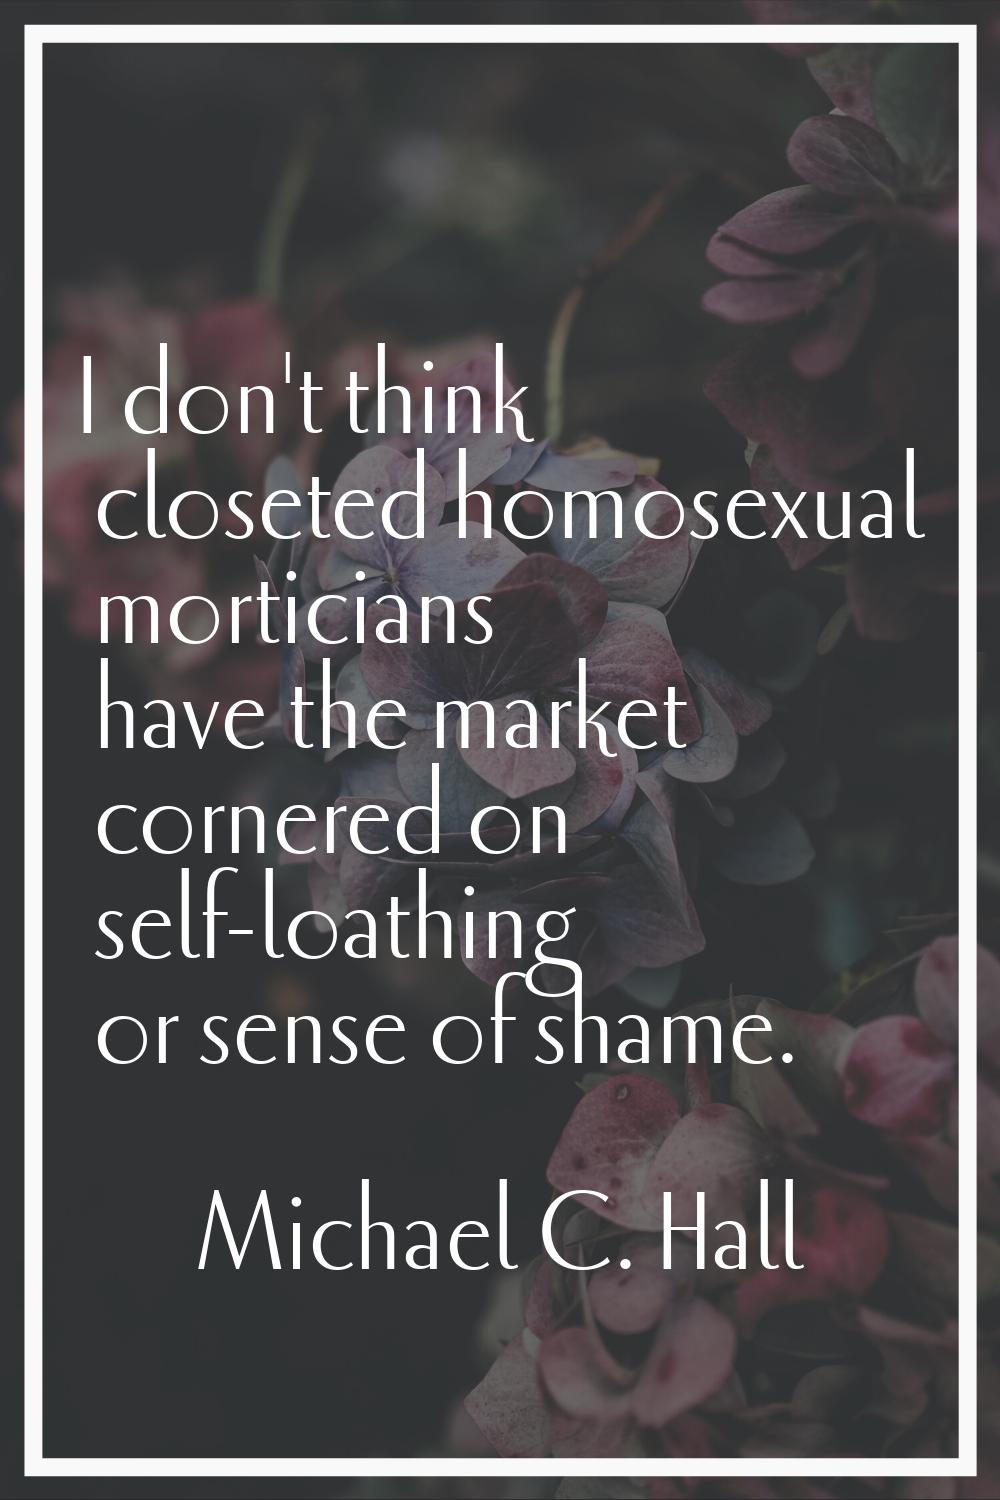 I don't think closeted homosexual morticians have the market cornered on self-loathing or sense of 